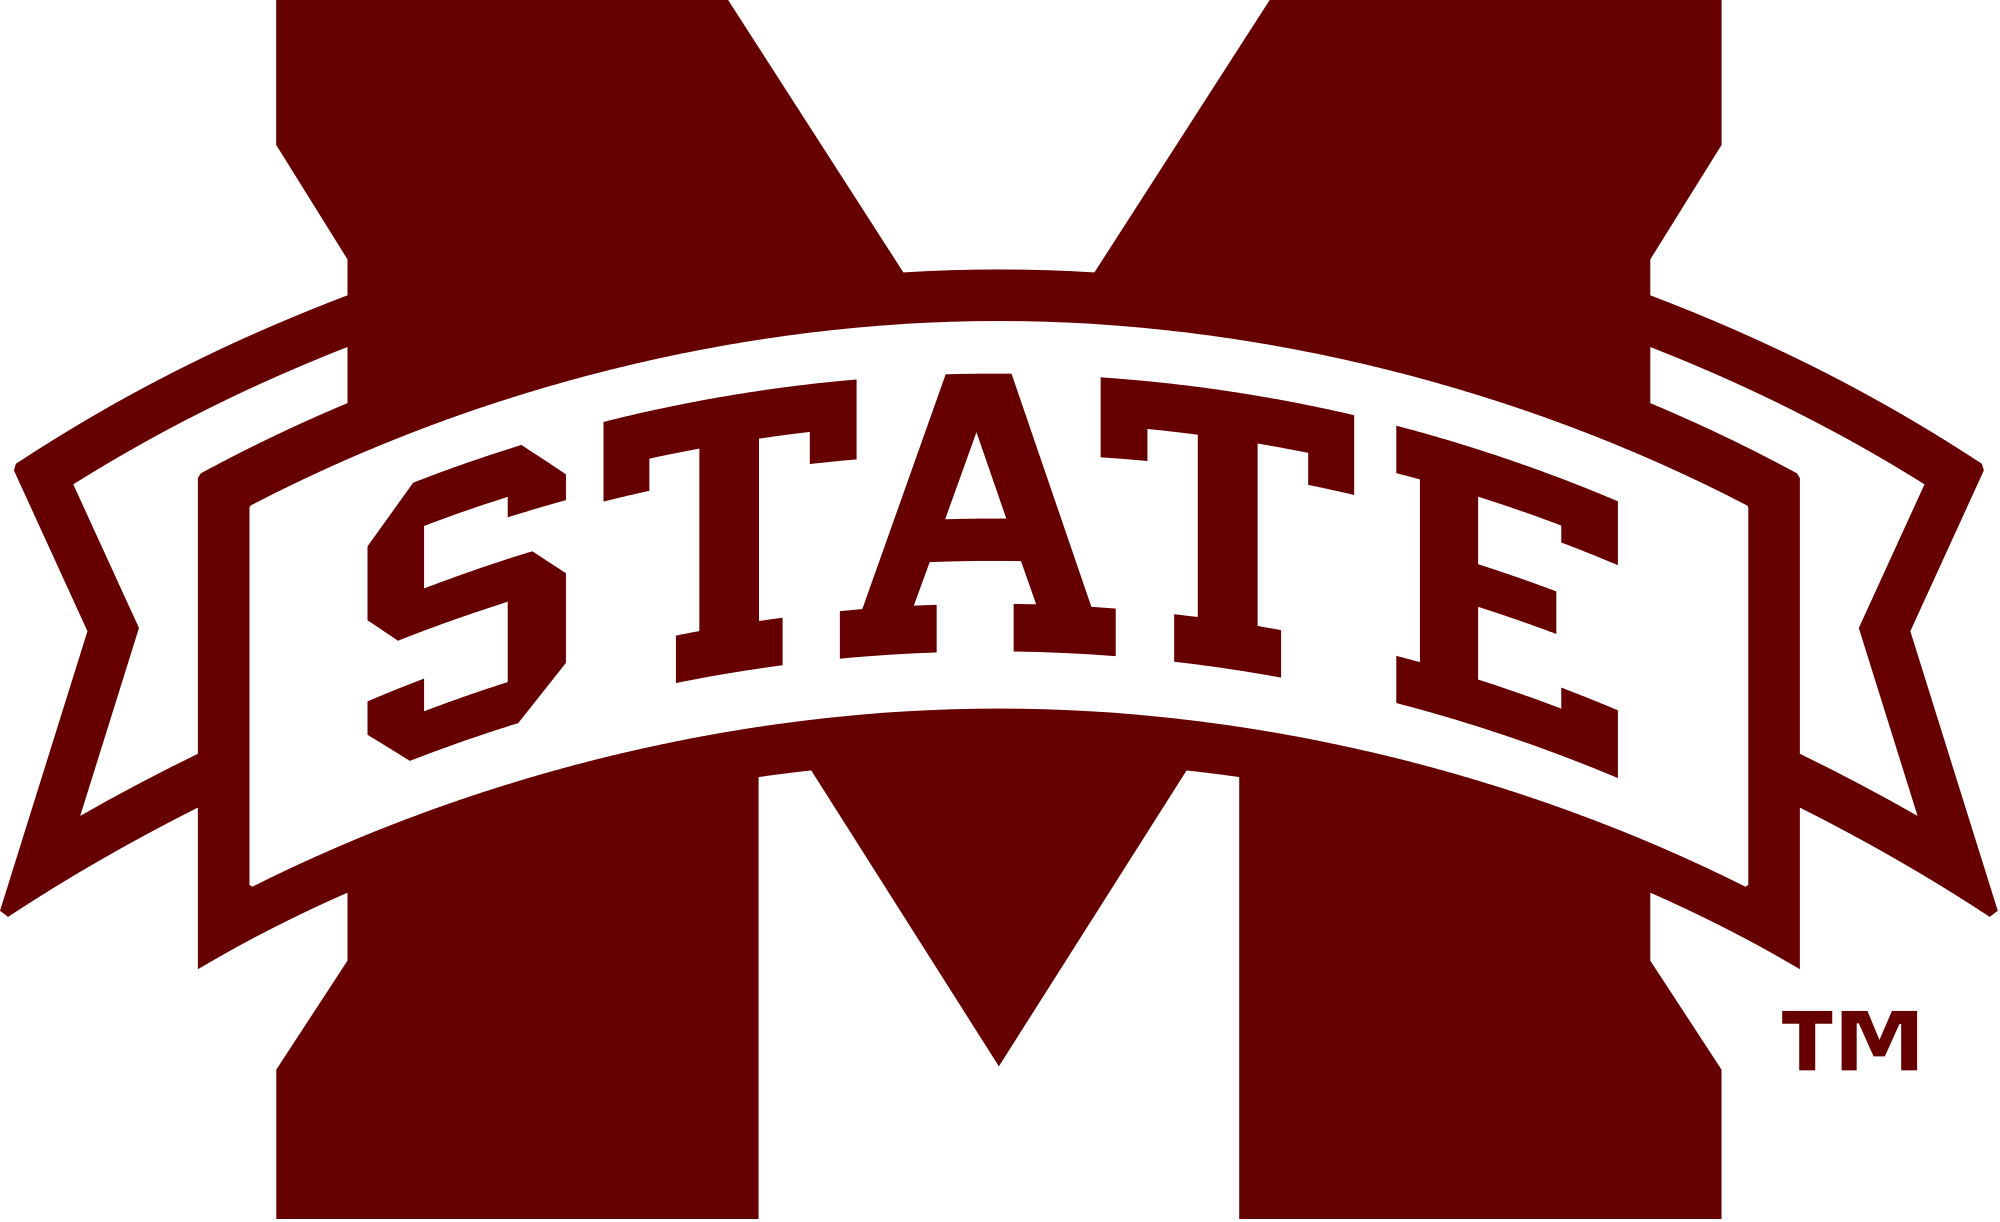 Mississippi State Seeks Assistant/Associate Professor of Dairy Science